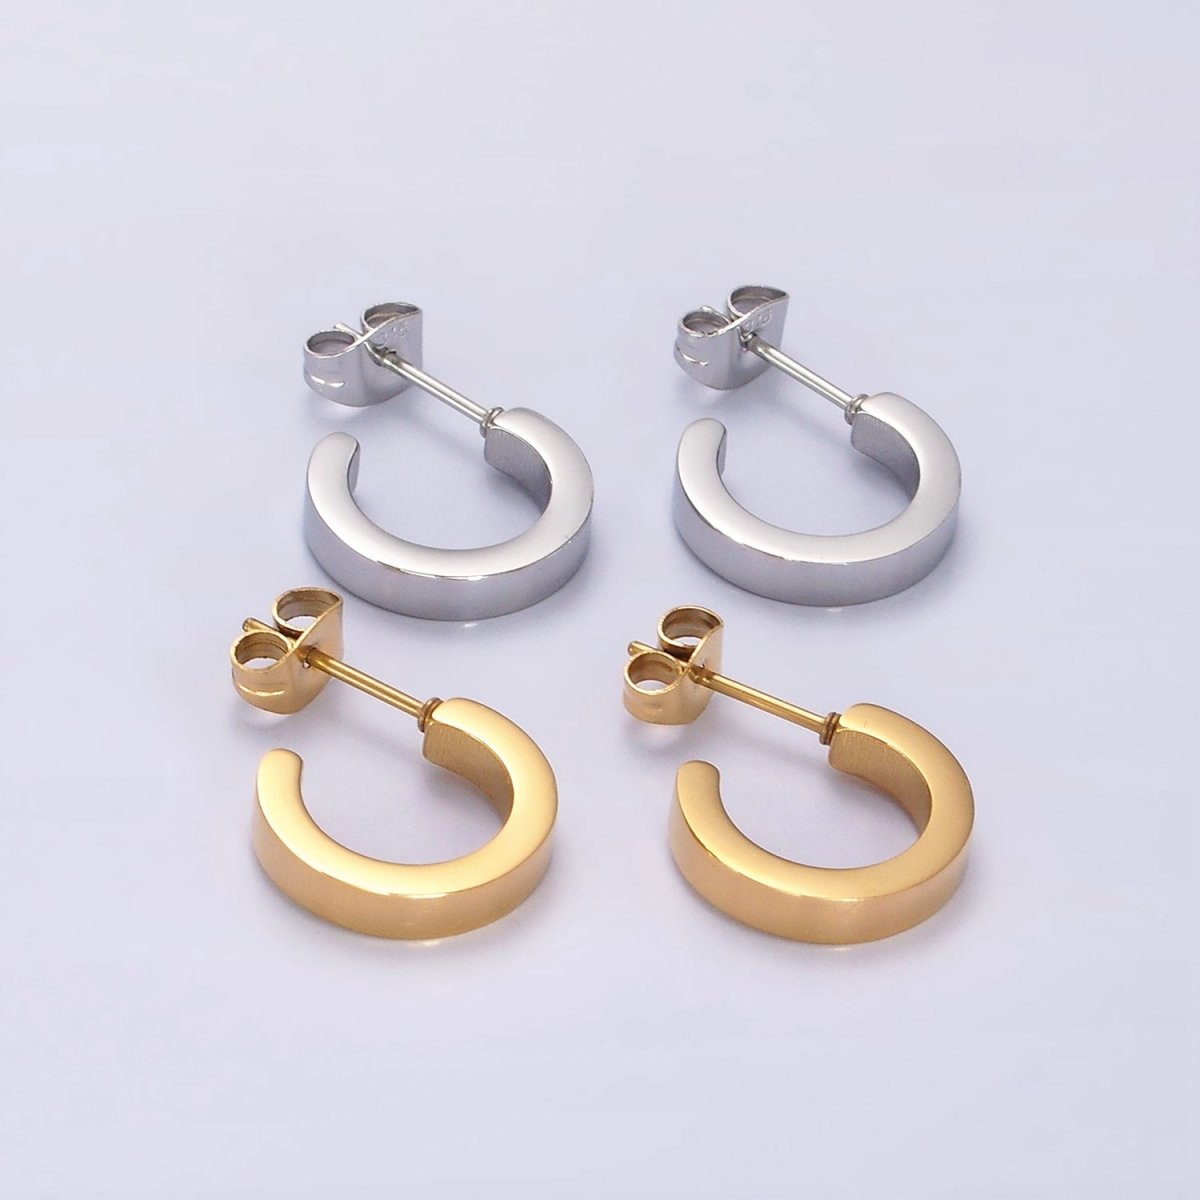 Stainless Steel 13.5mm Flat Minimalist C-Shaped Cartilage Hoop Earrings in Gold & Silver | V191 V192 - DLUXCA